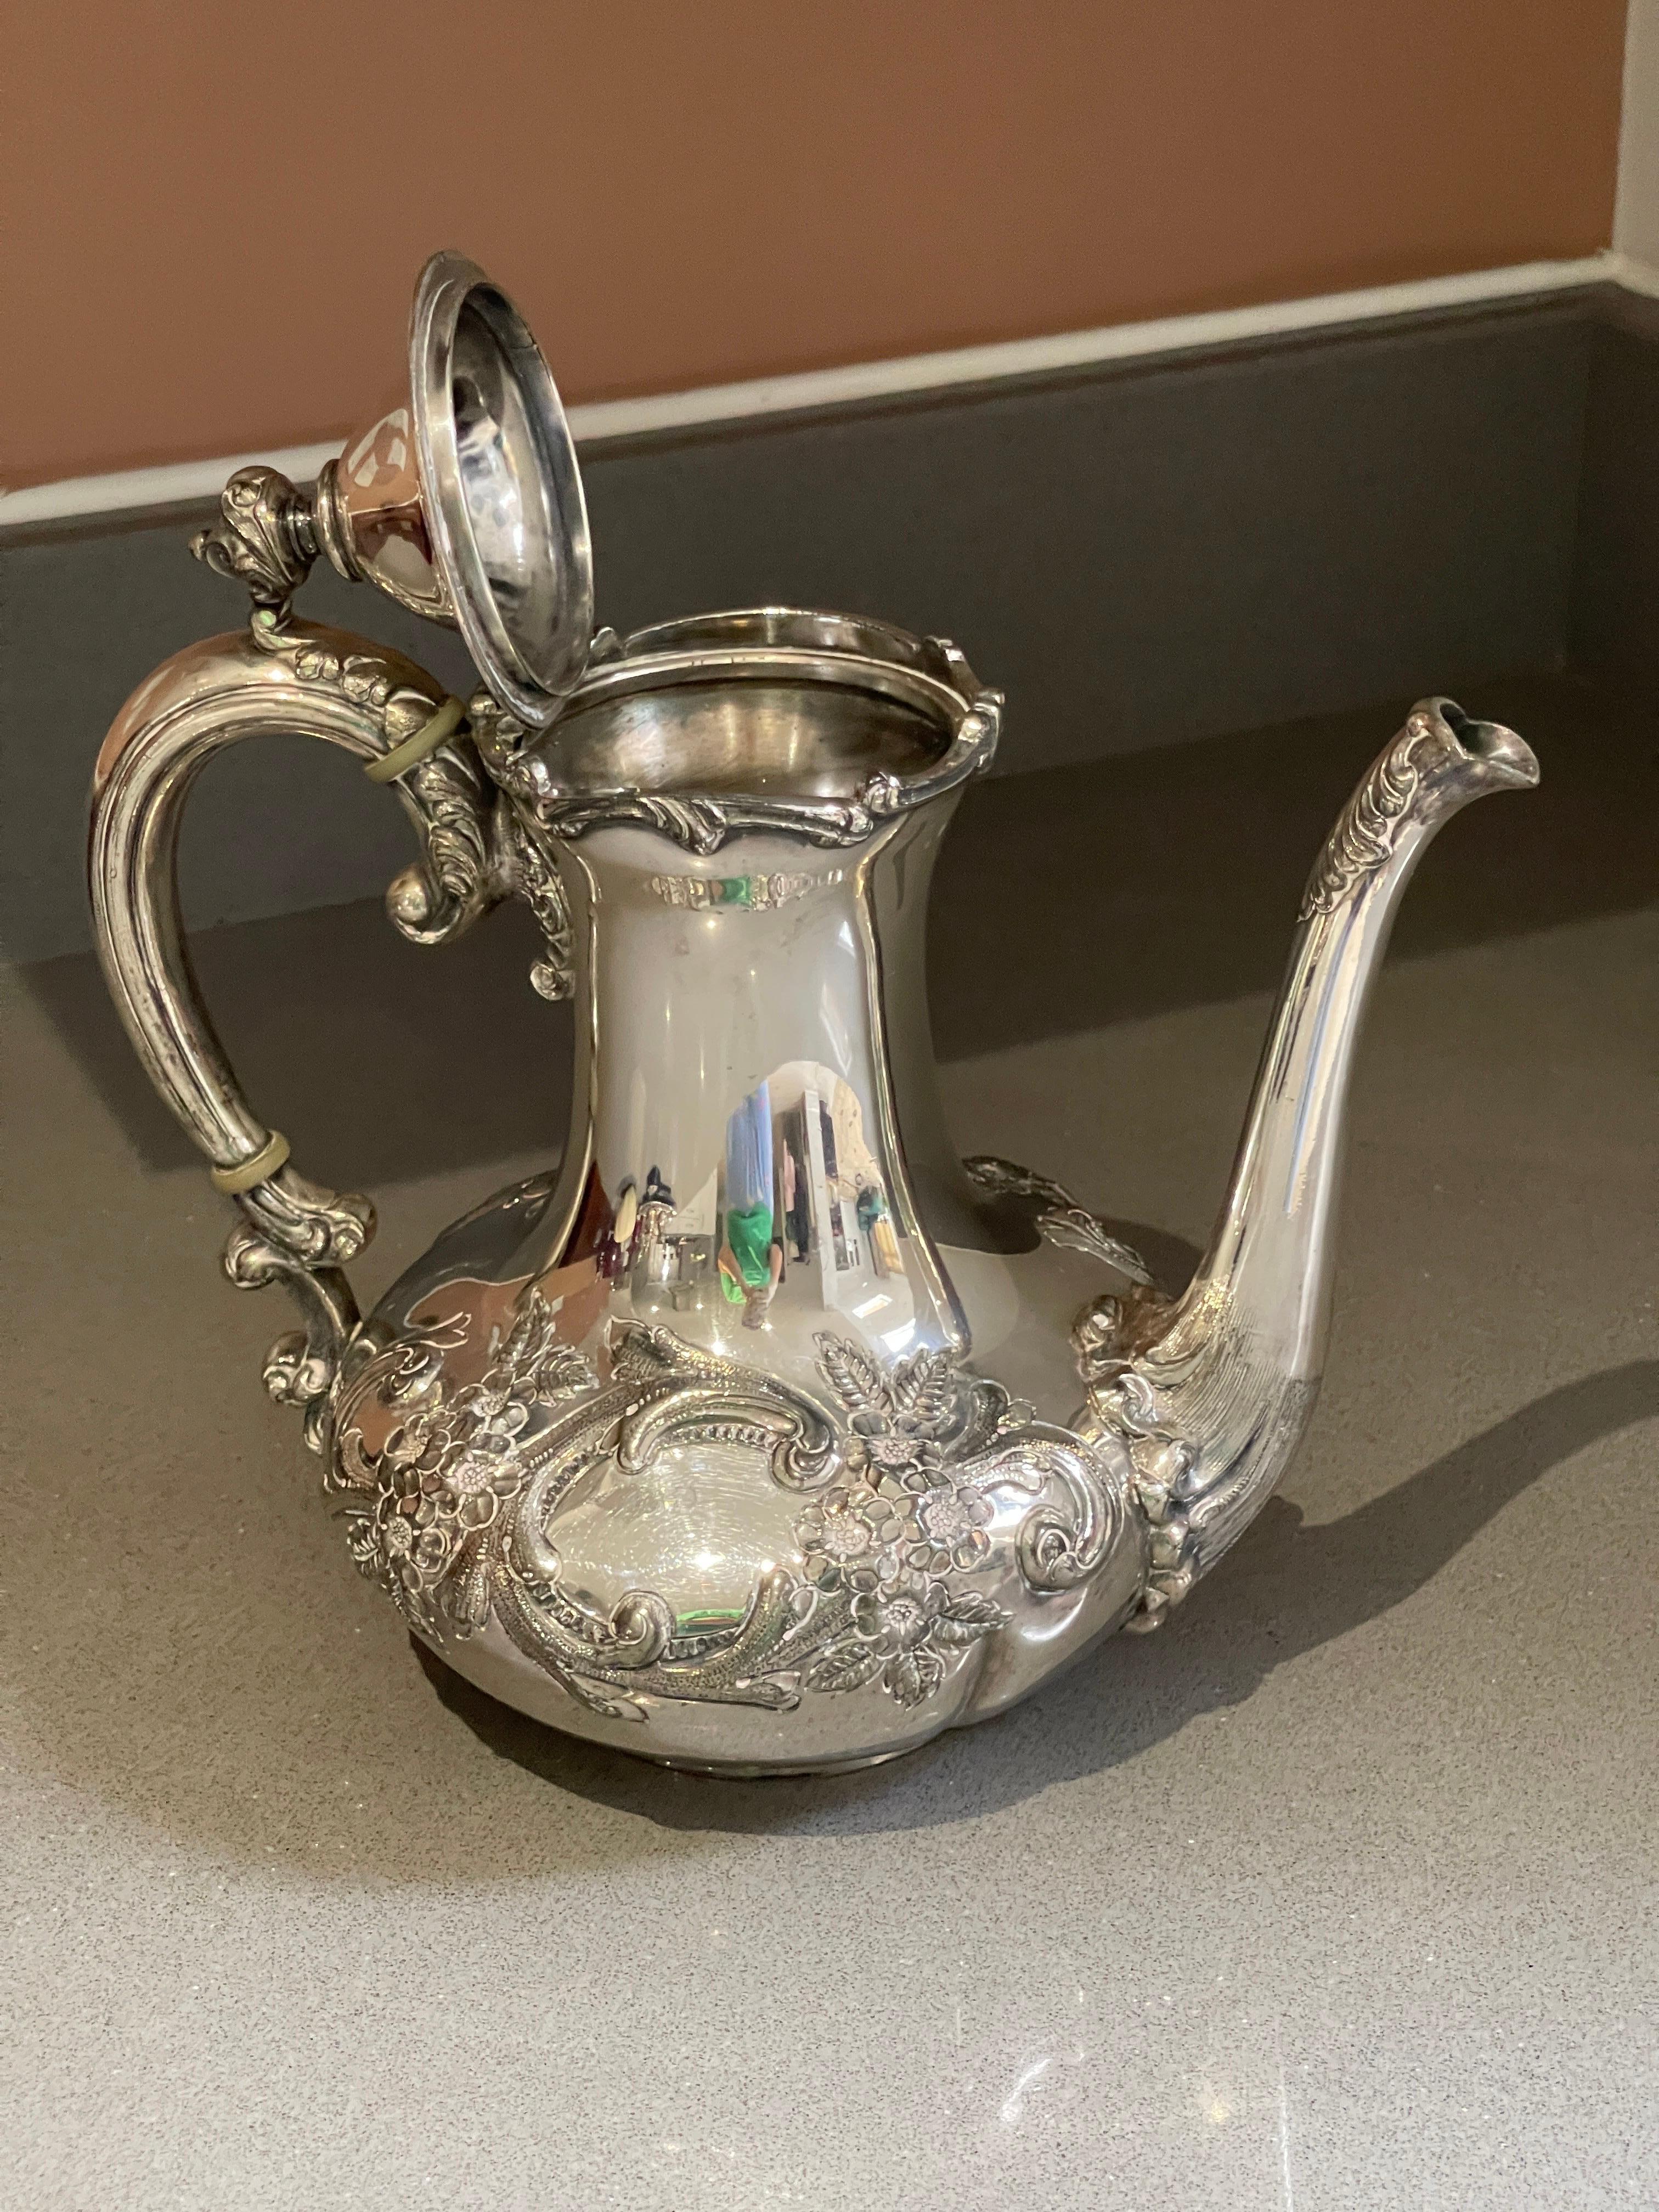 An antique tea set and a silver-plated teapot that is beautifully designed and created are suitable for elegant serving. With lid pressed, cast and chased, gold gilding on the inside. Oval, domed body on short, curved feet with hinged, vaulted lid.